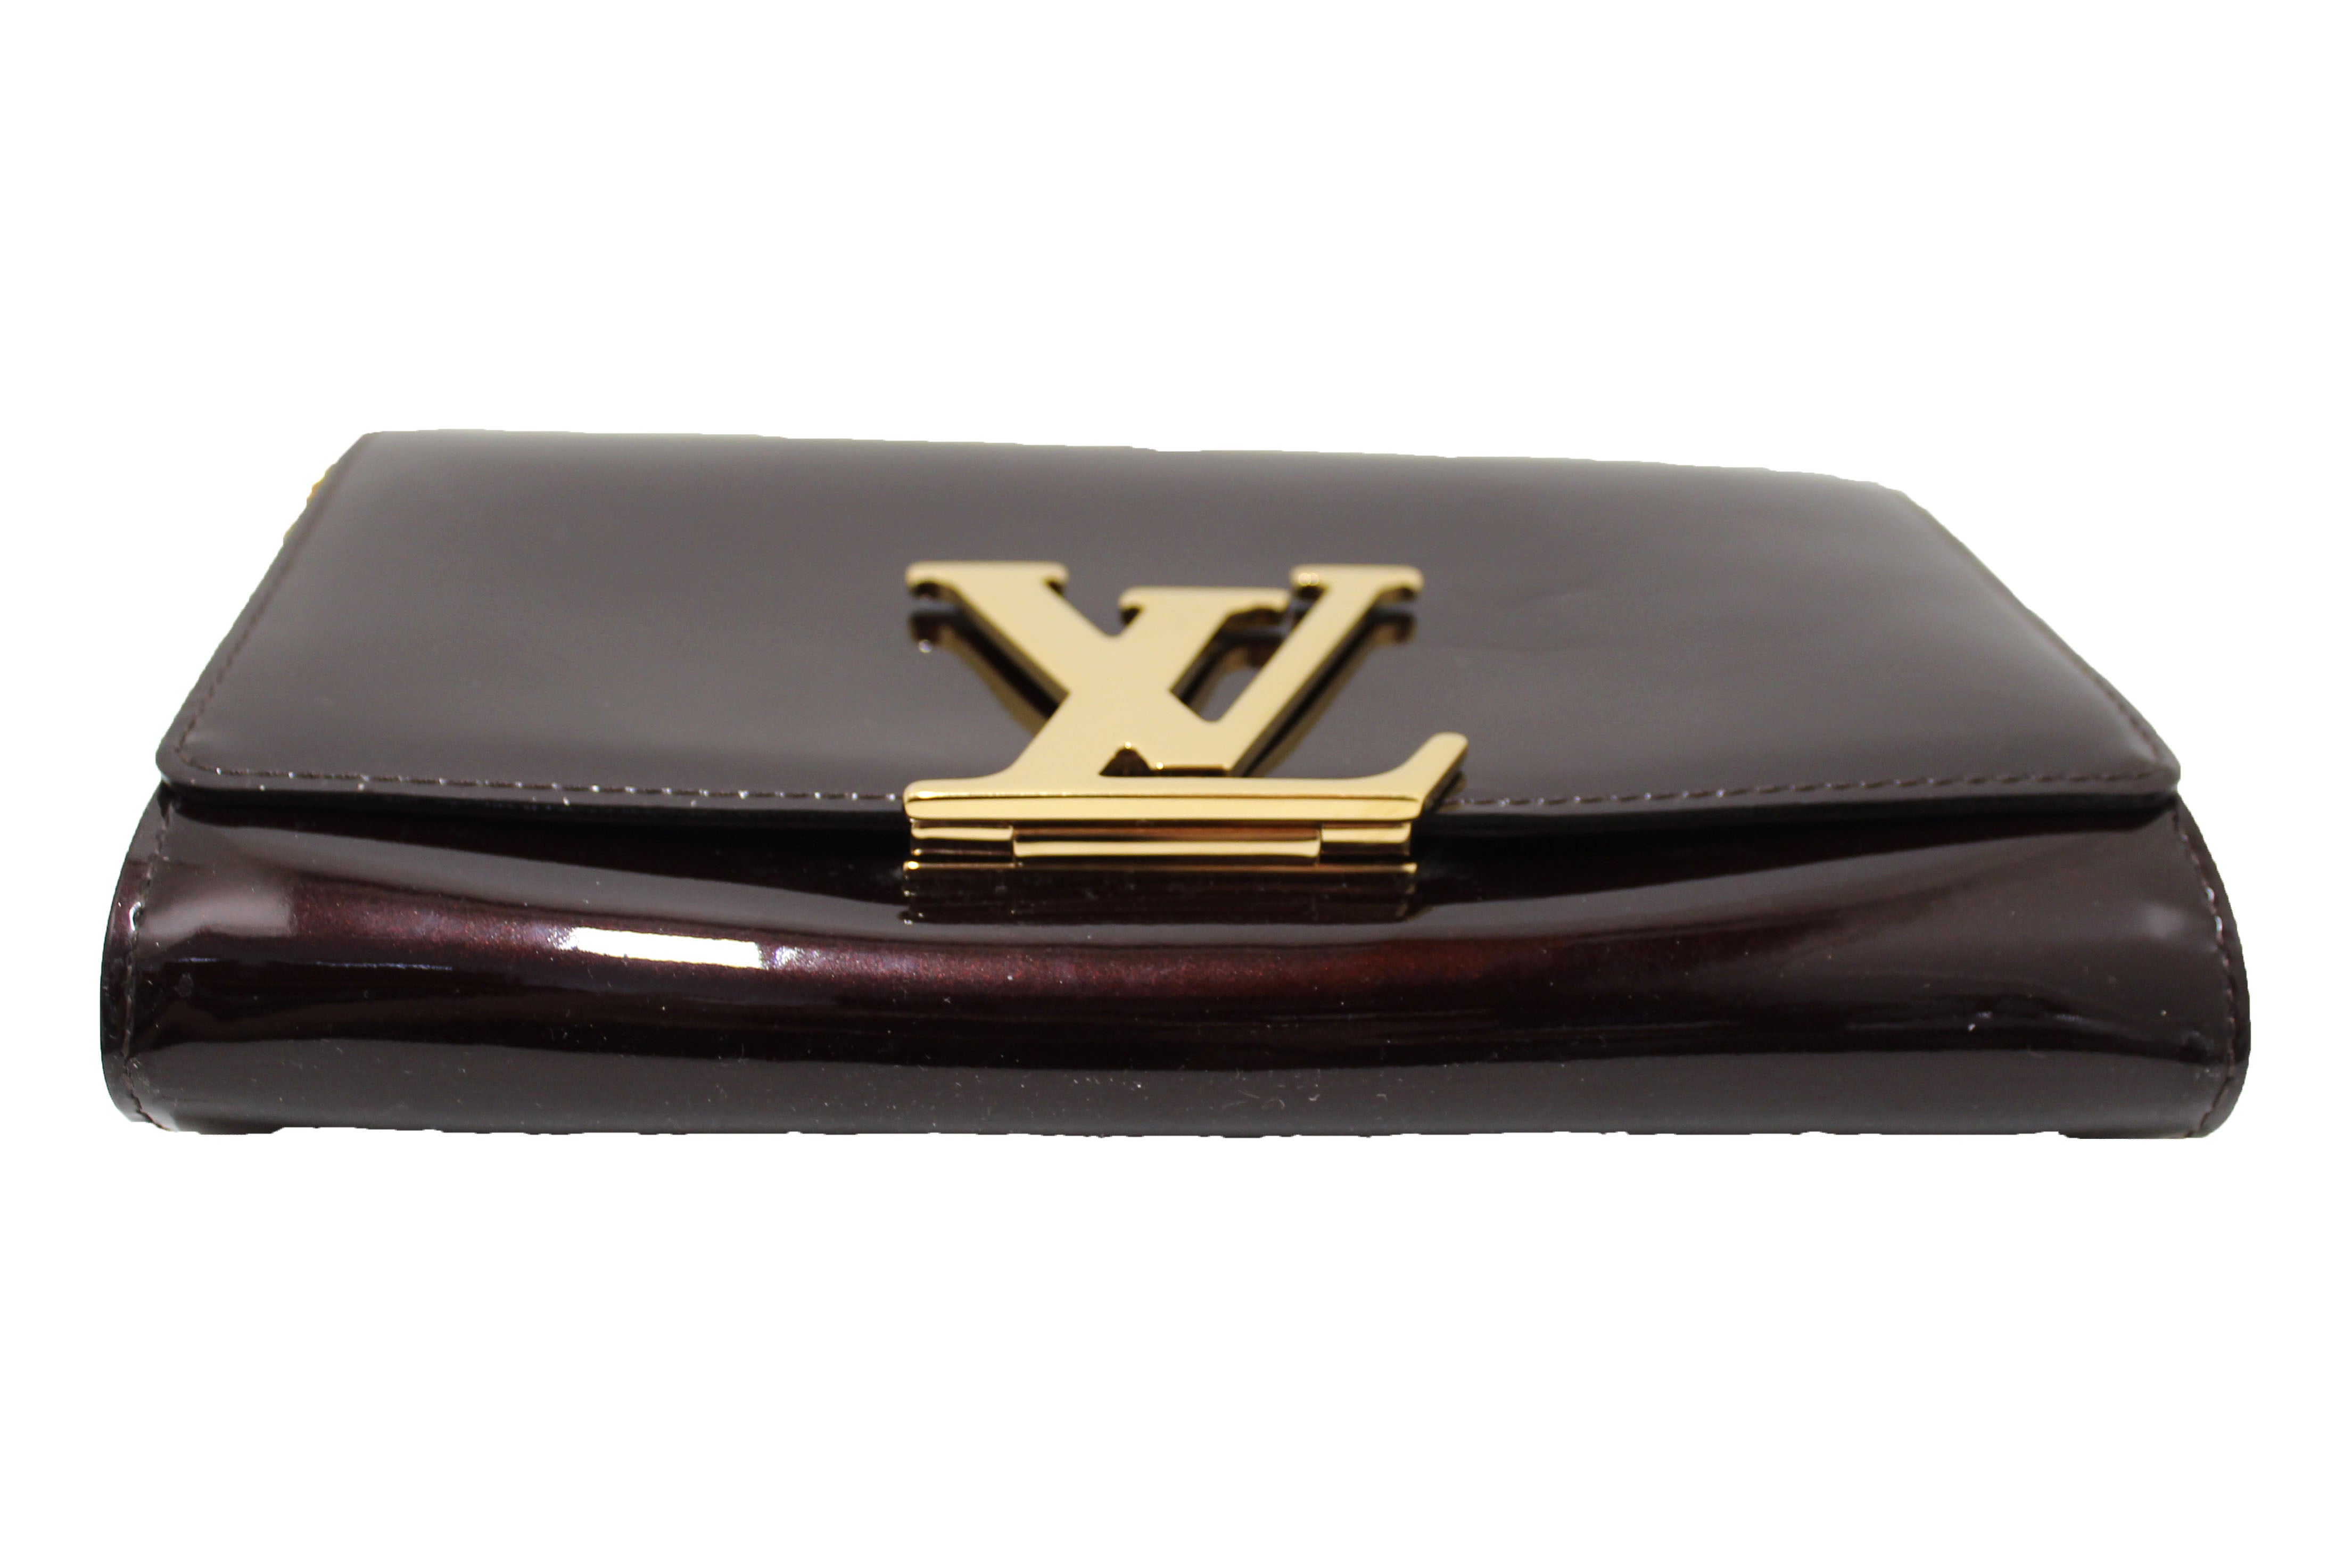 Louis Vuitton Chain Louise PM Black in Patent Leather with Gold